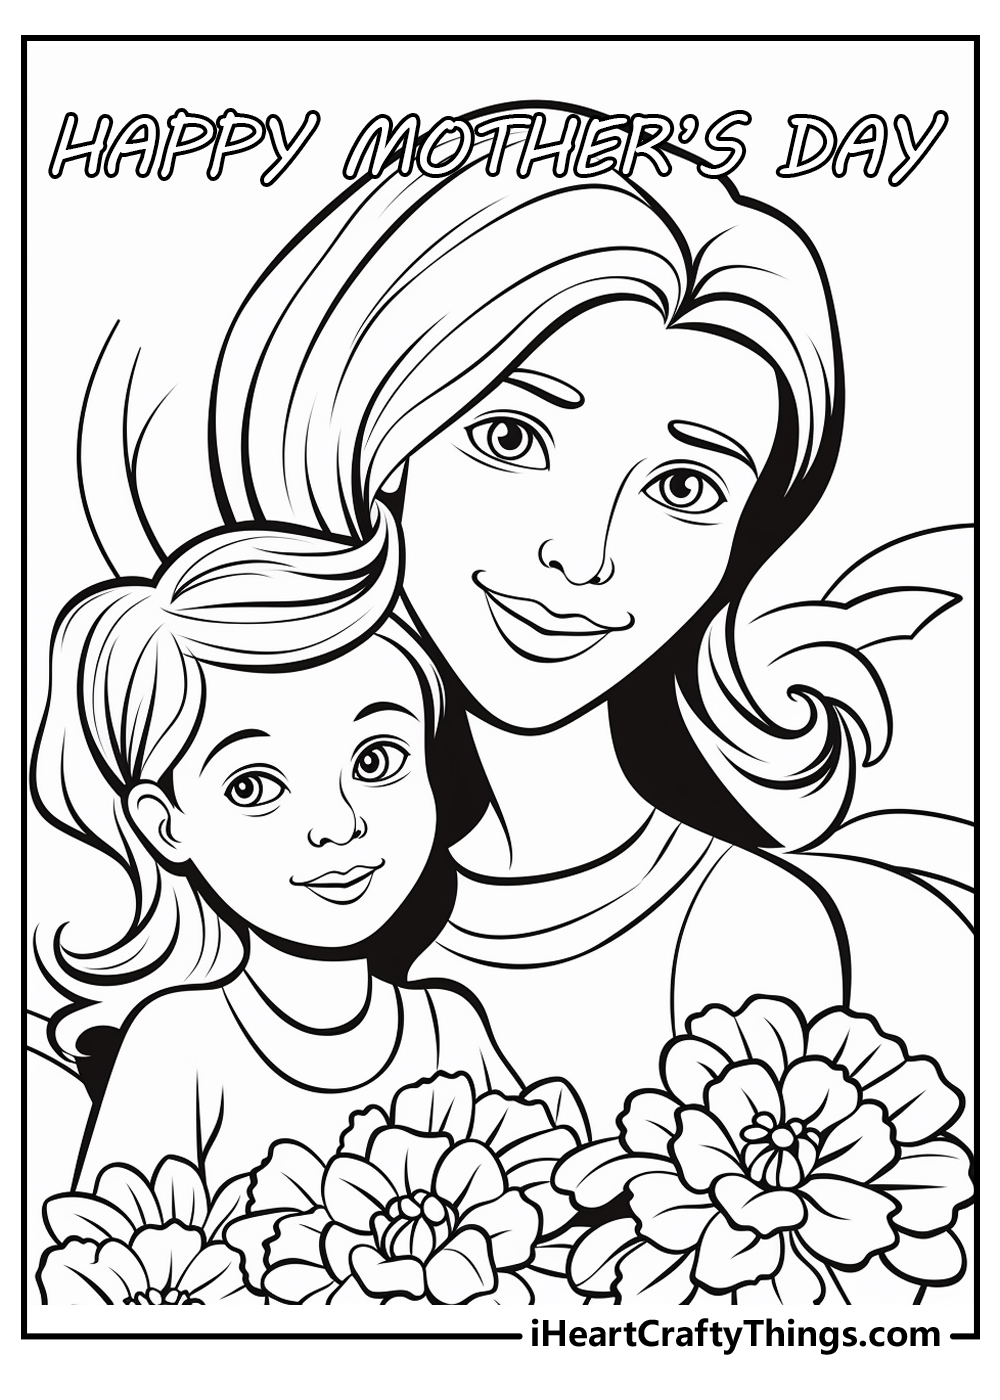 mother's day coloring sheet free download